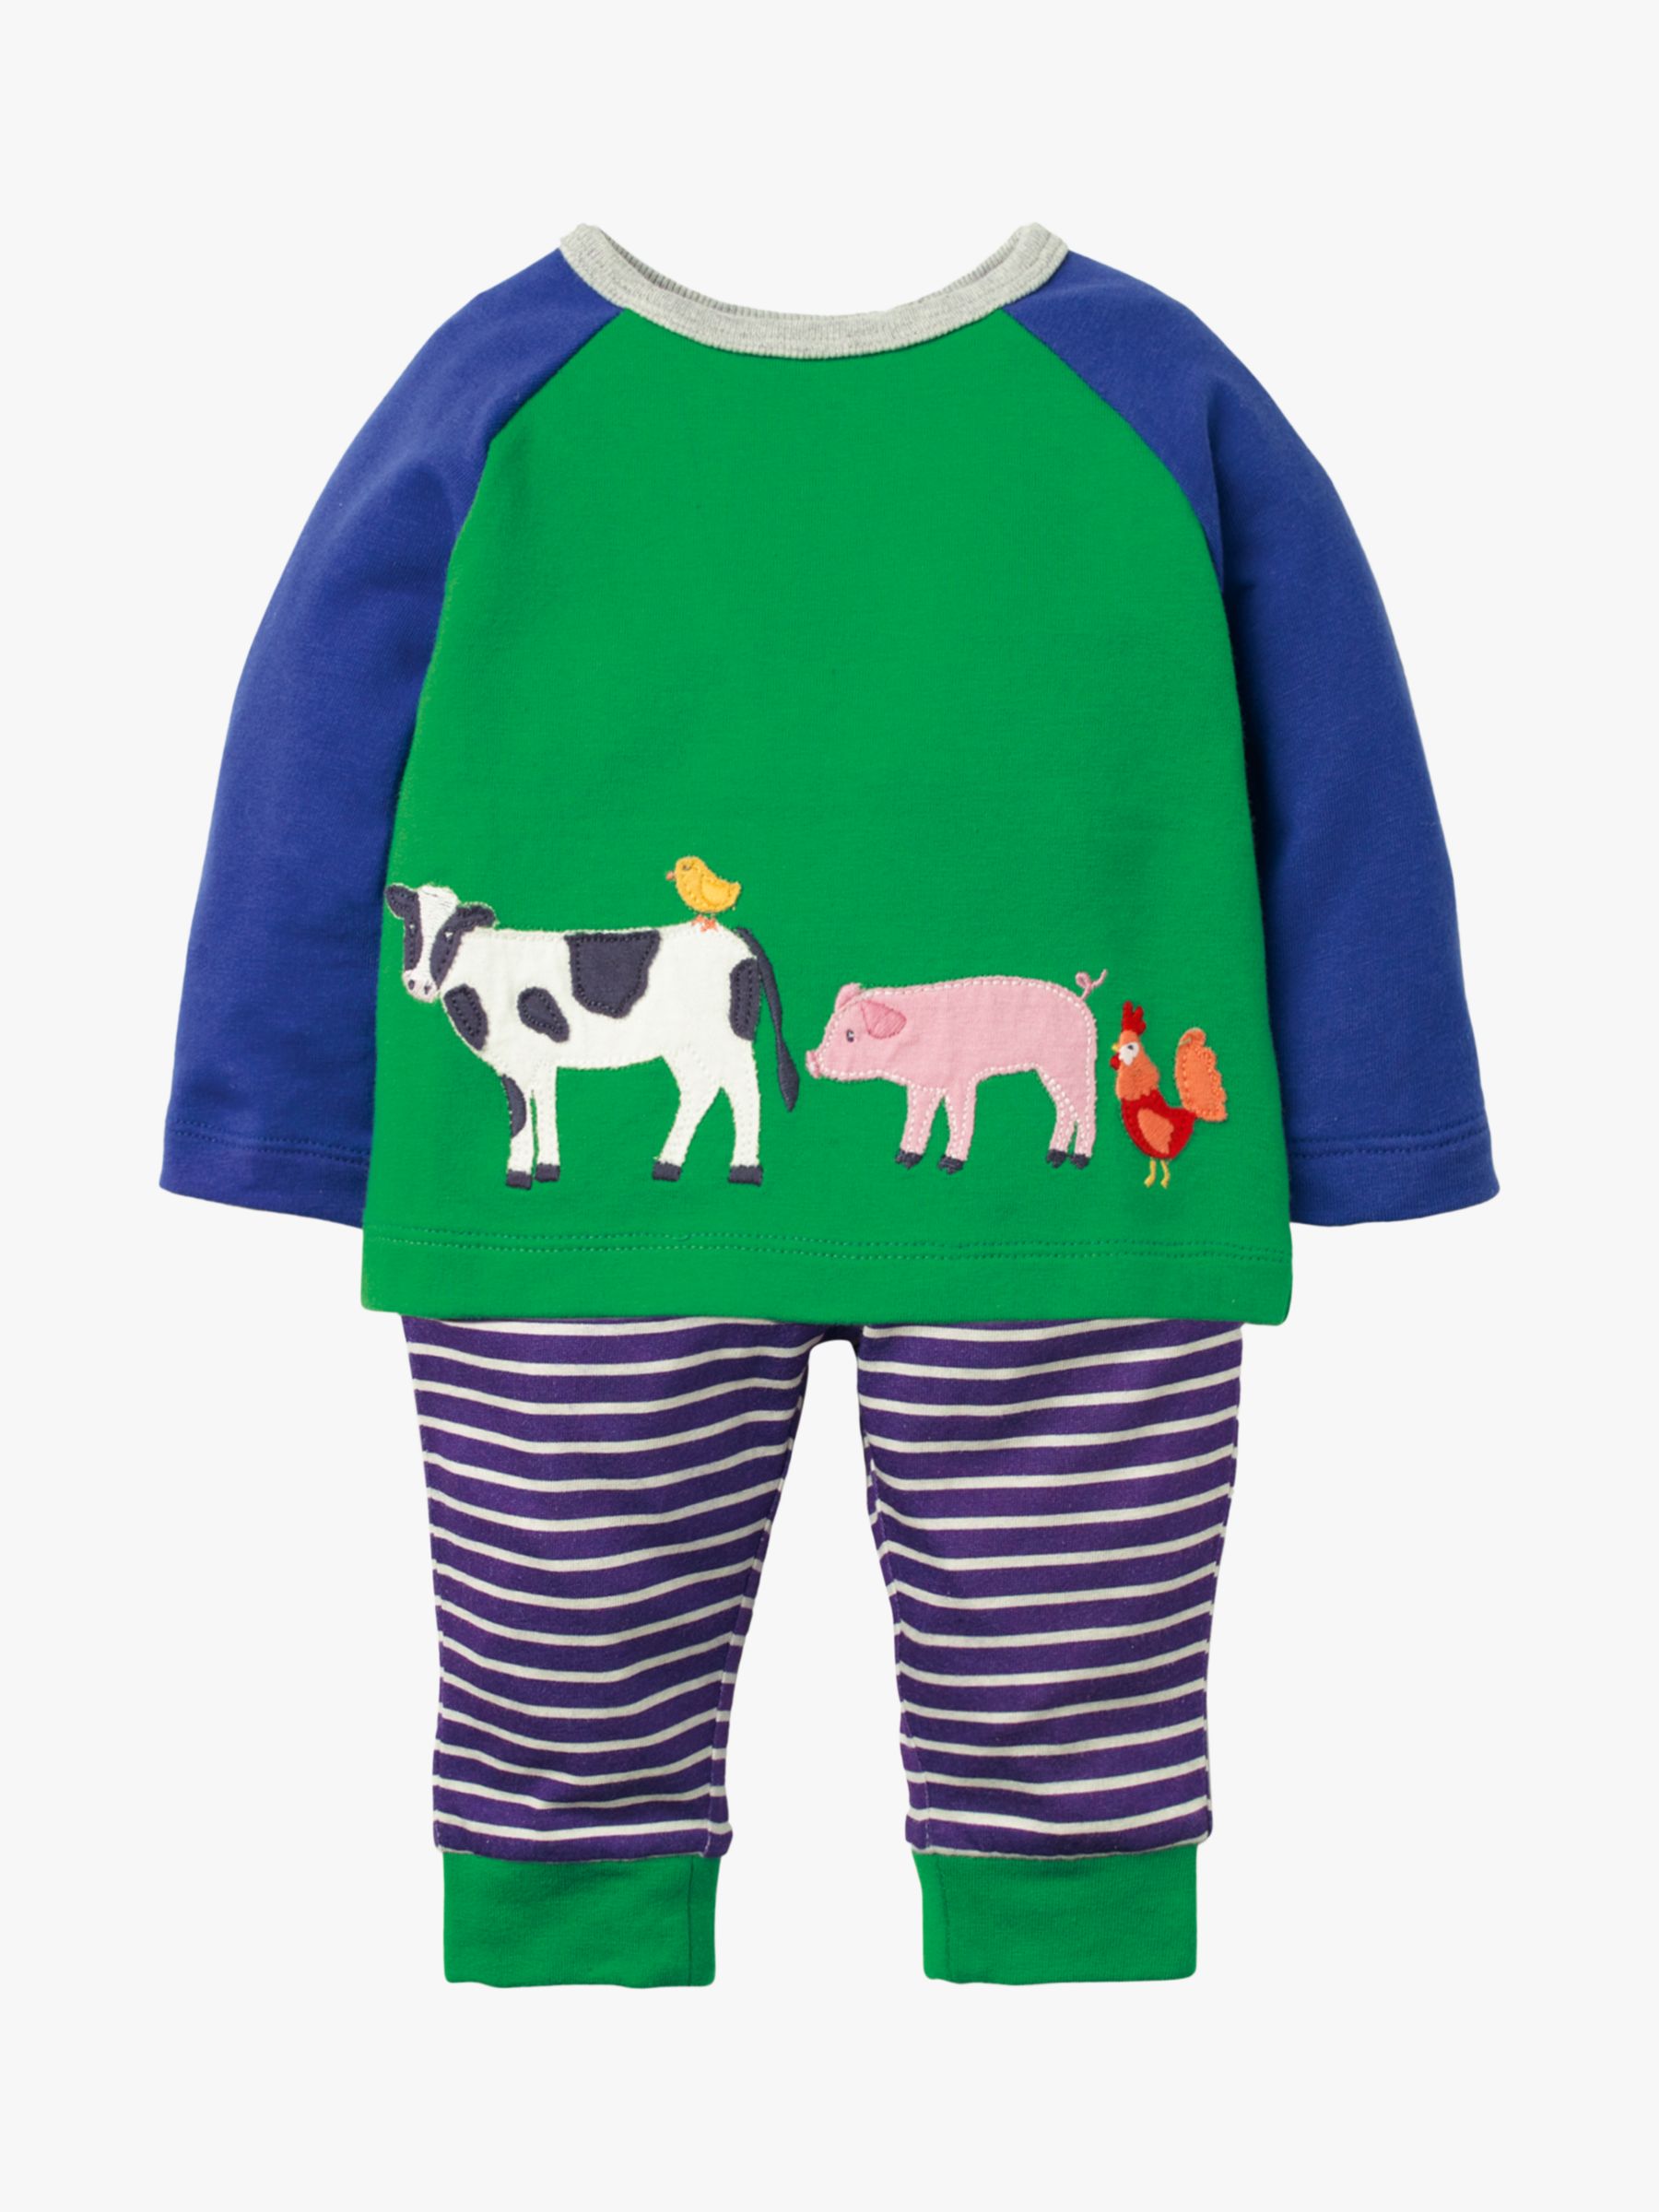 boden baby clothes uk